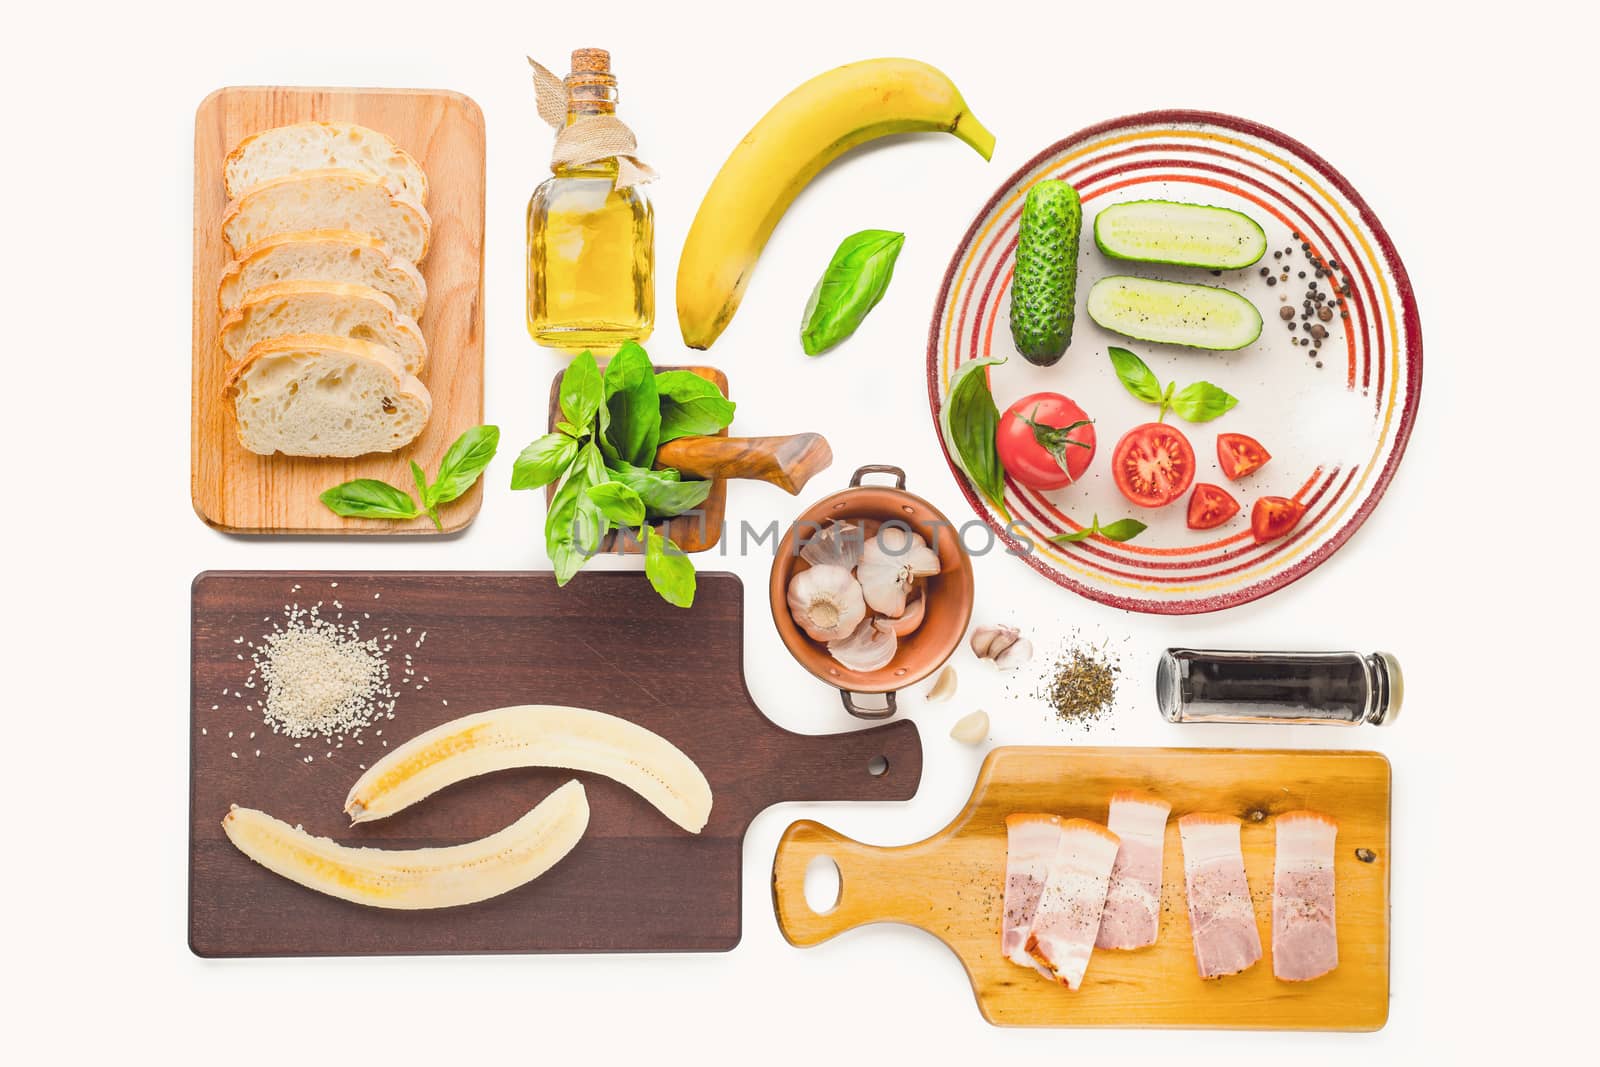 Ingredients for tartines on the white background